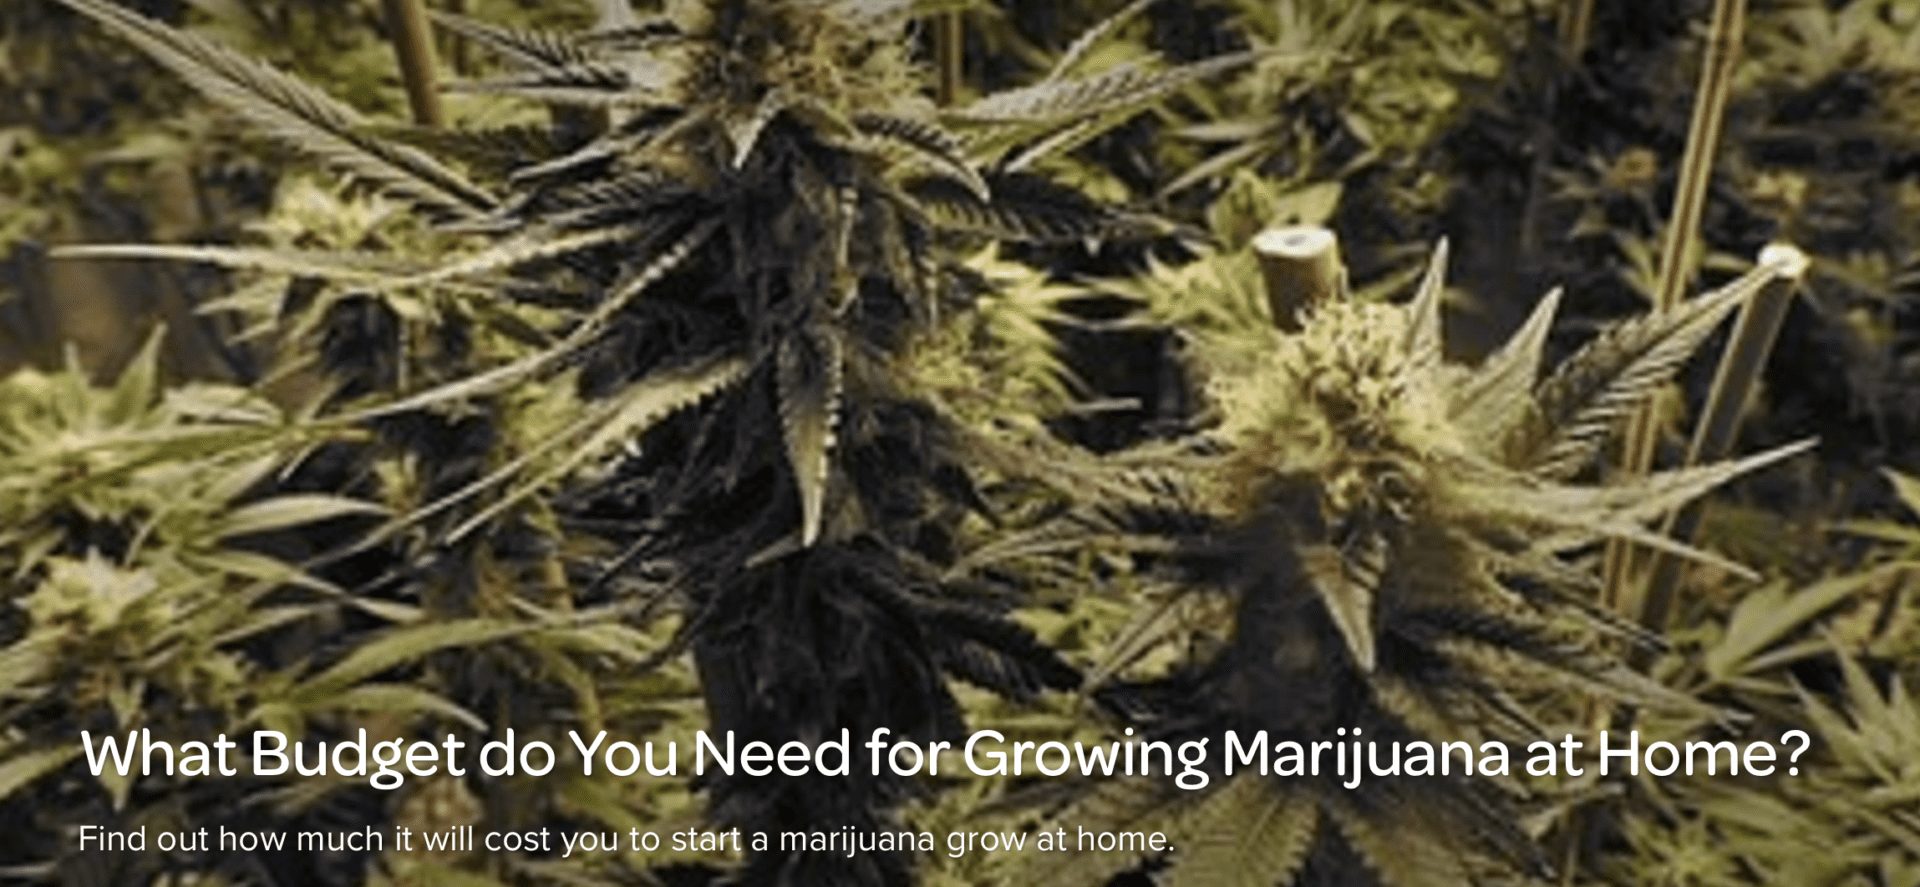 What Budget do You Need for Growing Marijuana at Home?